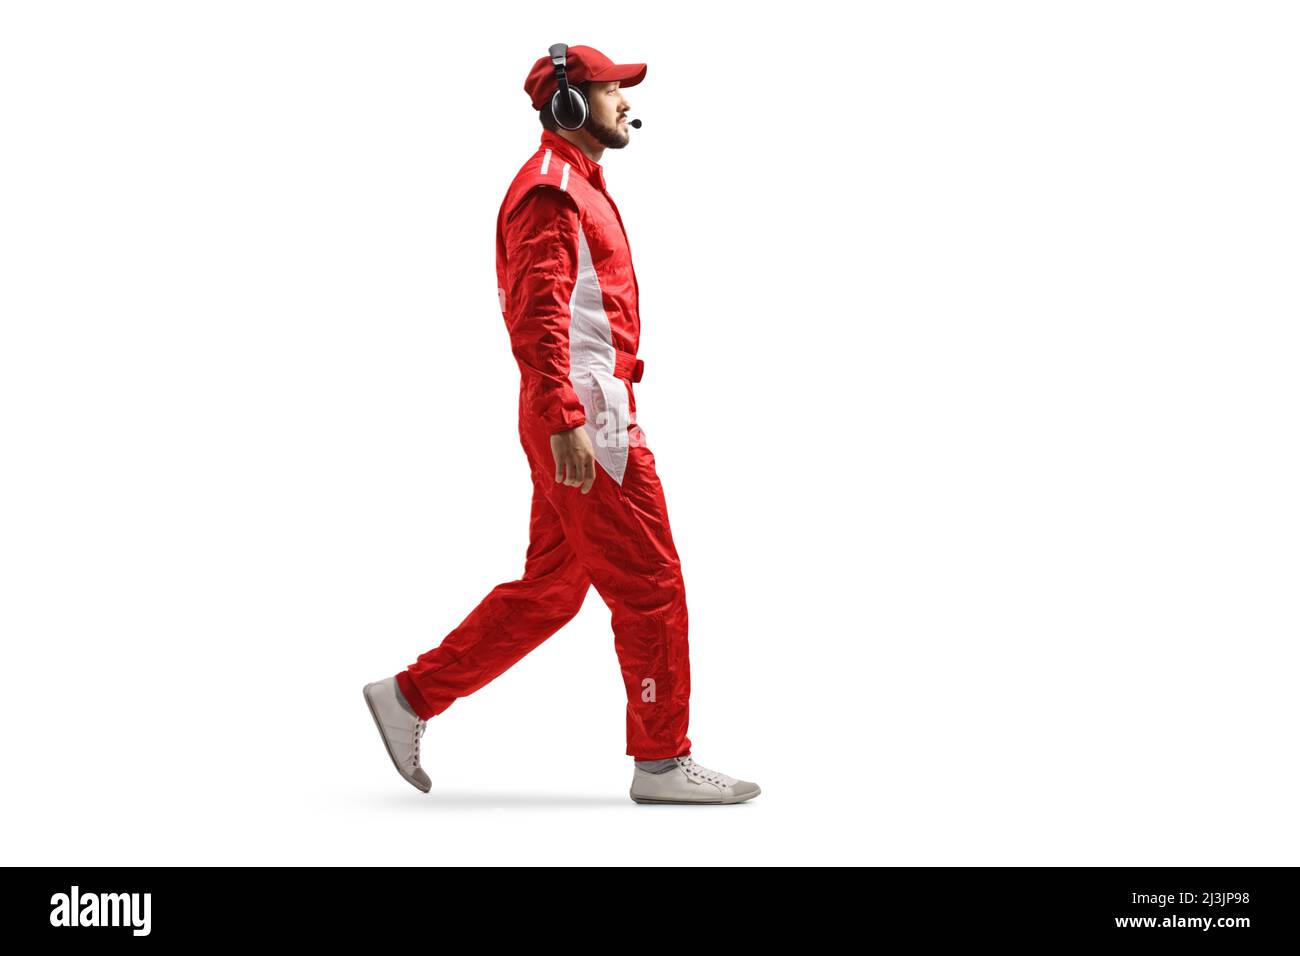 Full length profile shot of a race team member with headphones and a red suit walking isolated on white background Stock Photo